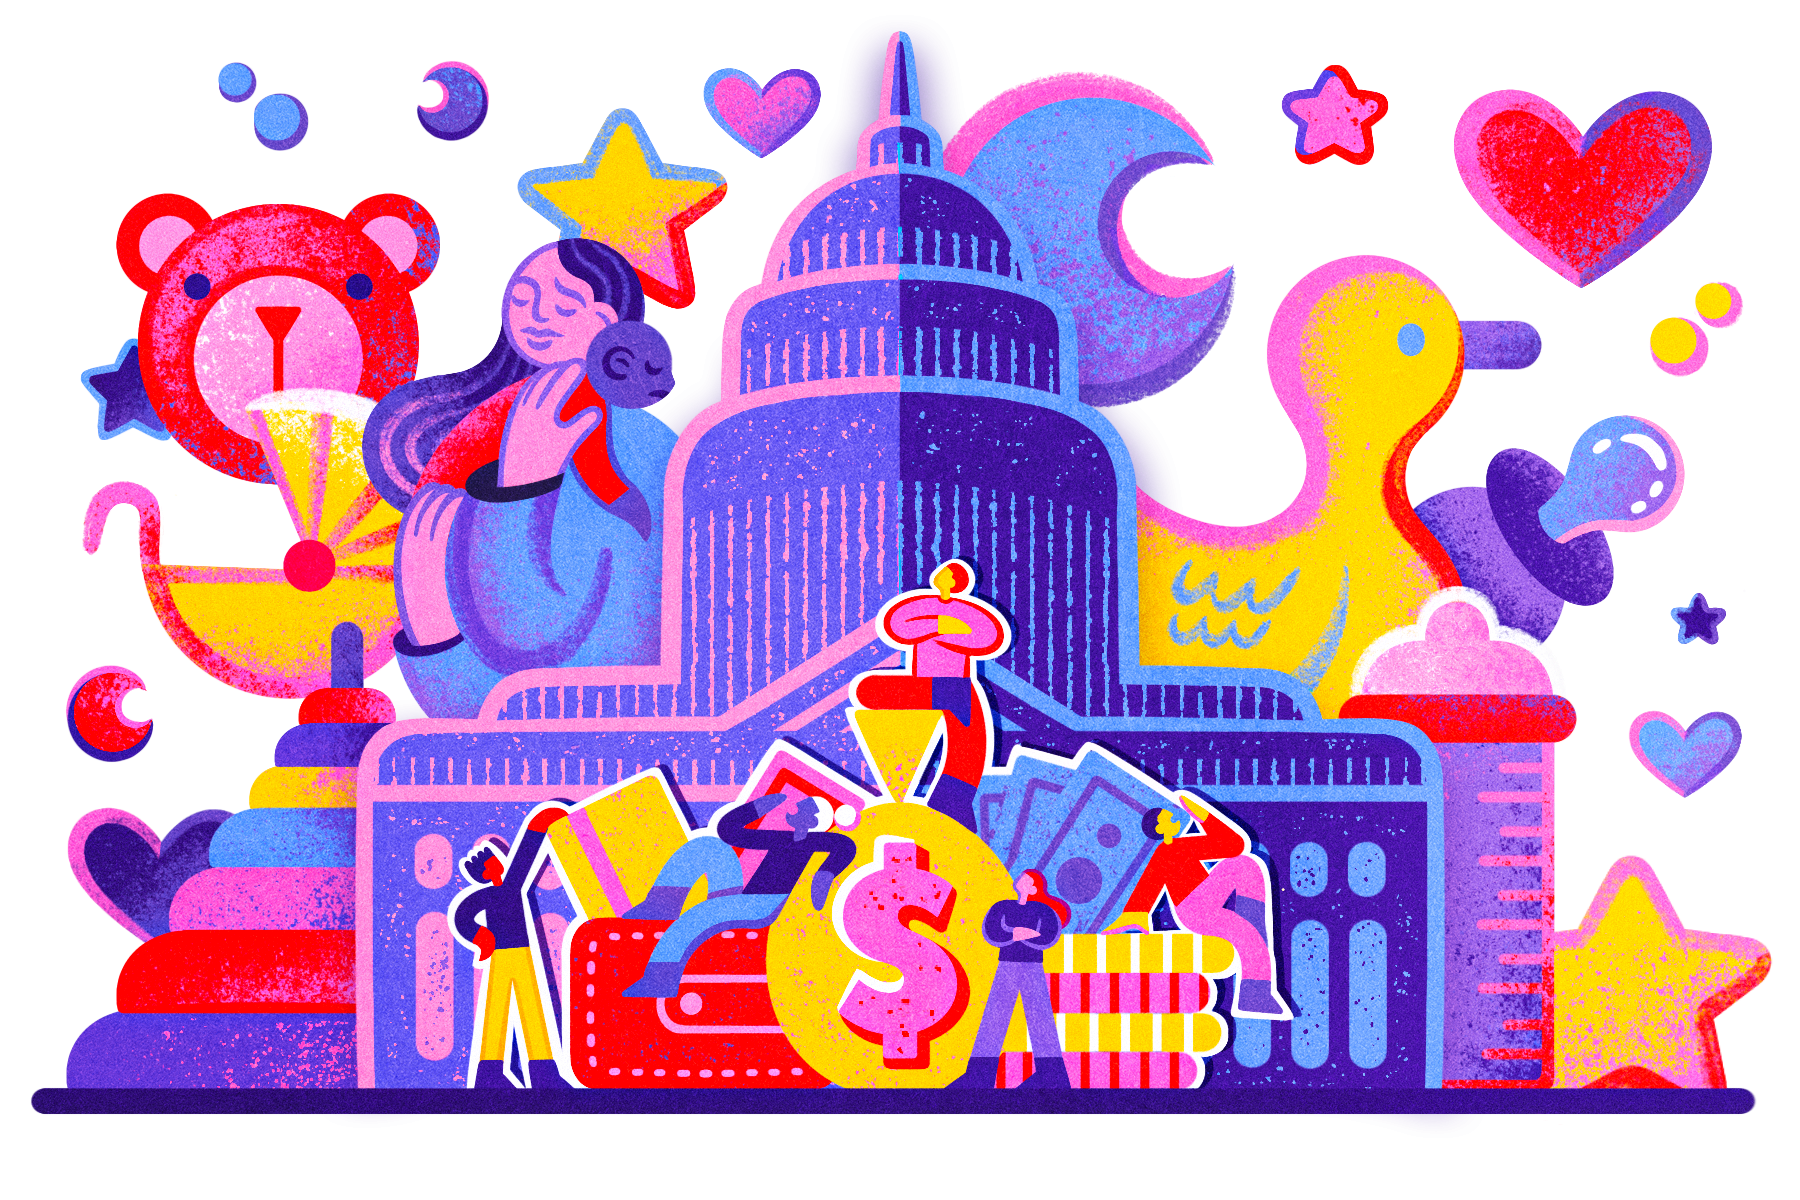 An illustration focused on childcare and congress. The illustration has the nation's Capitol with a baby bottles, pacifier, and stacking rings. Seemingly 